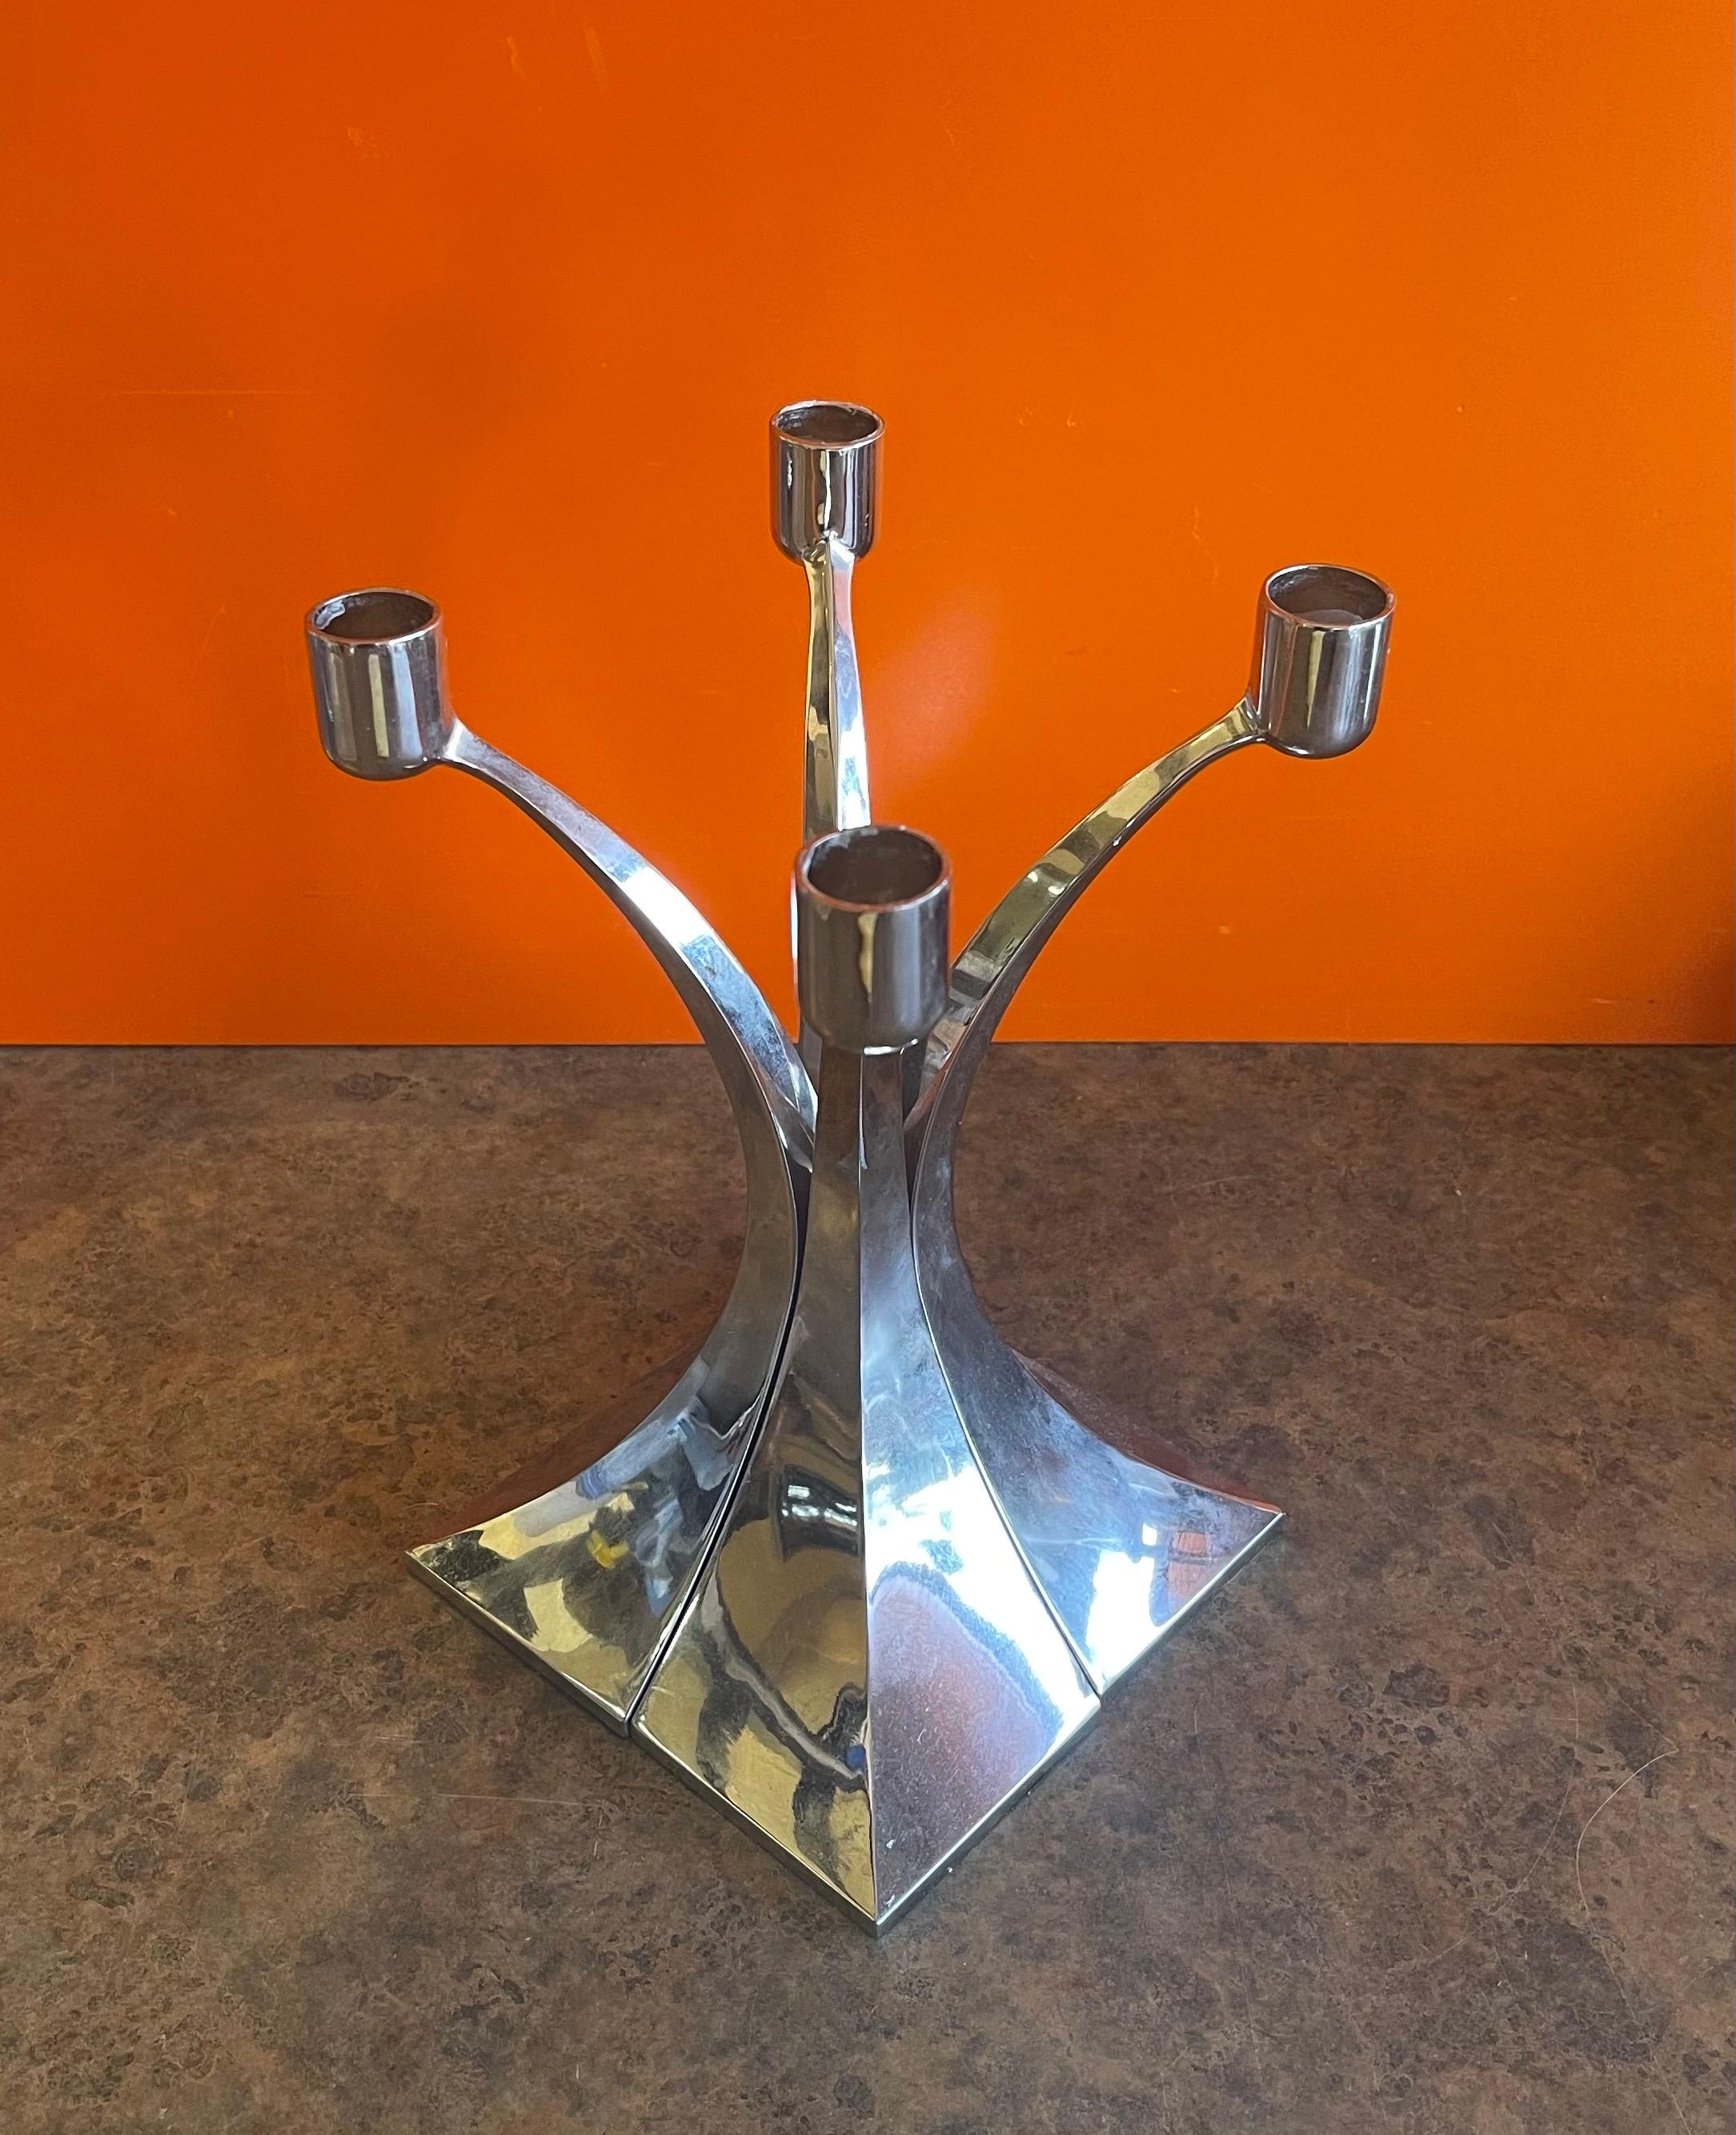 Set of four MCM chrome candlesticks that can be positioned in a number of configurations to make some very cool candleabras. Beautiful arched design on these solid polished chrome-plated steel pieces with 1